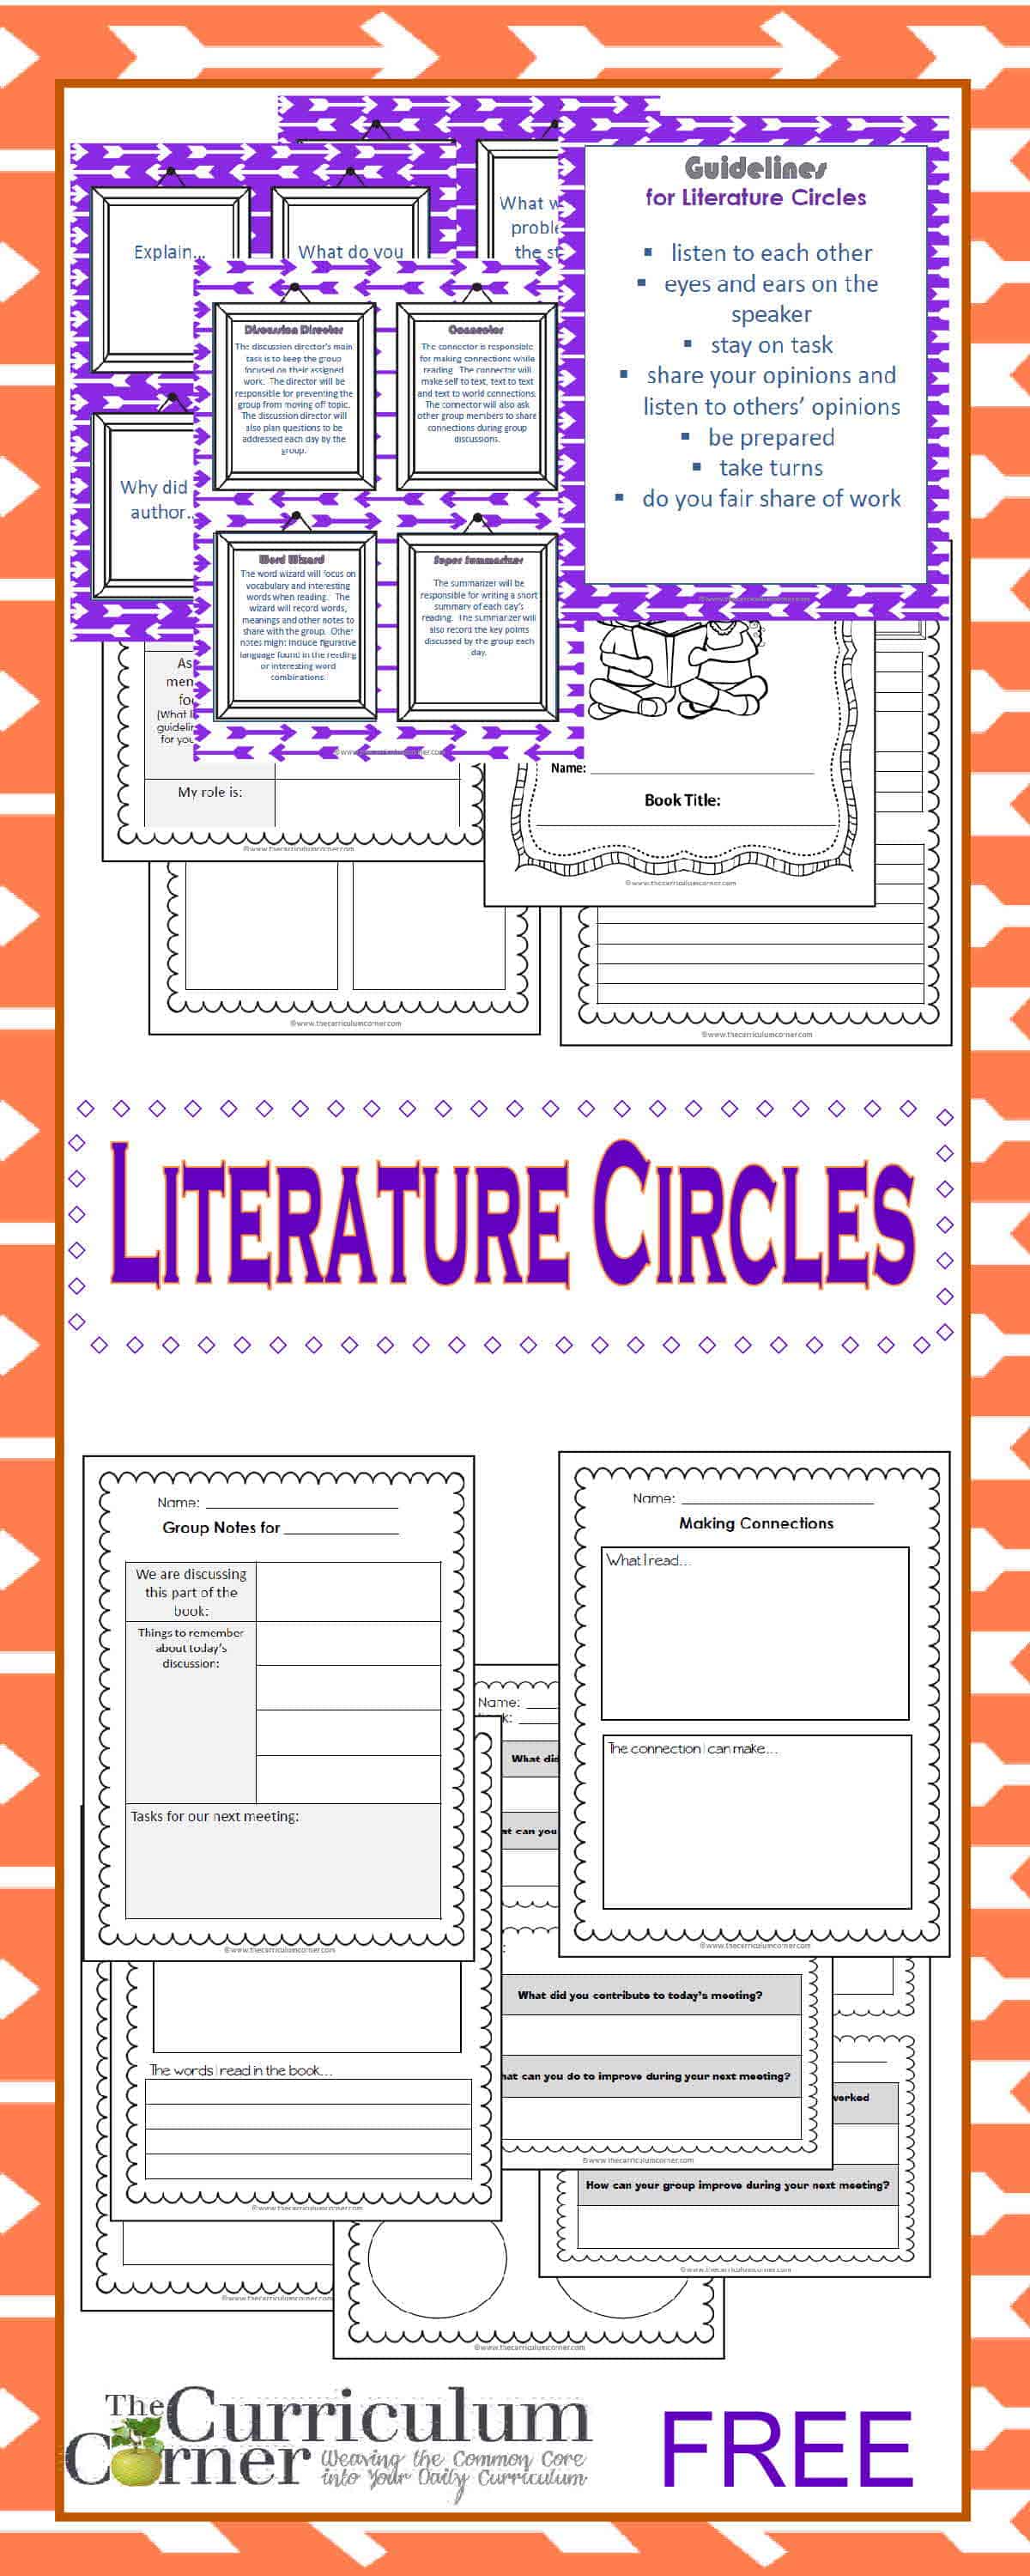 Getting Started with Literature Circles - The Curriculum Corner 4-5-6